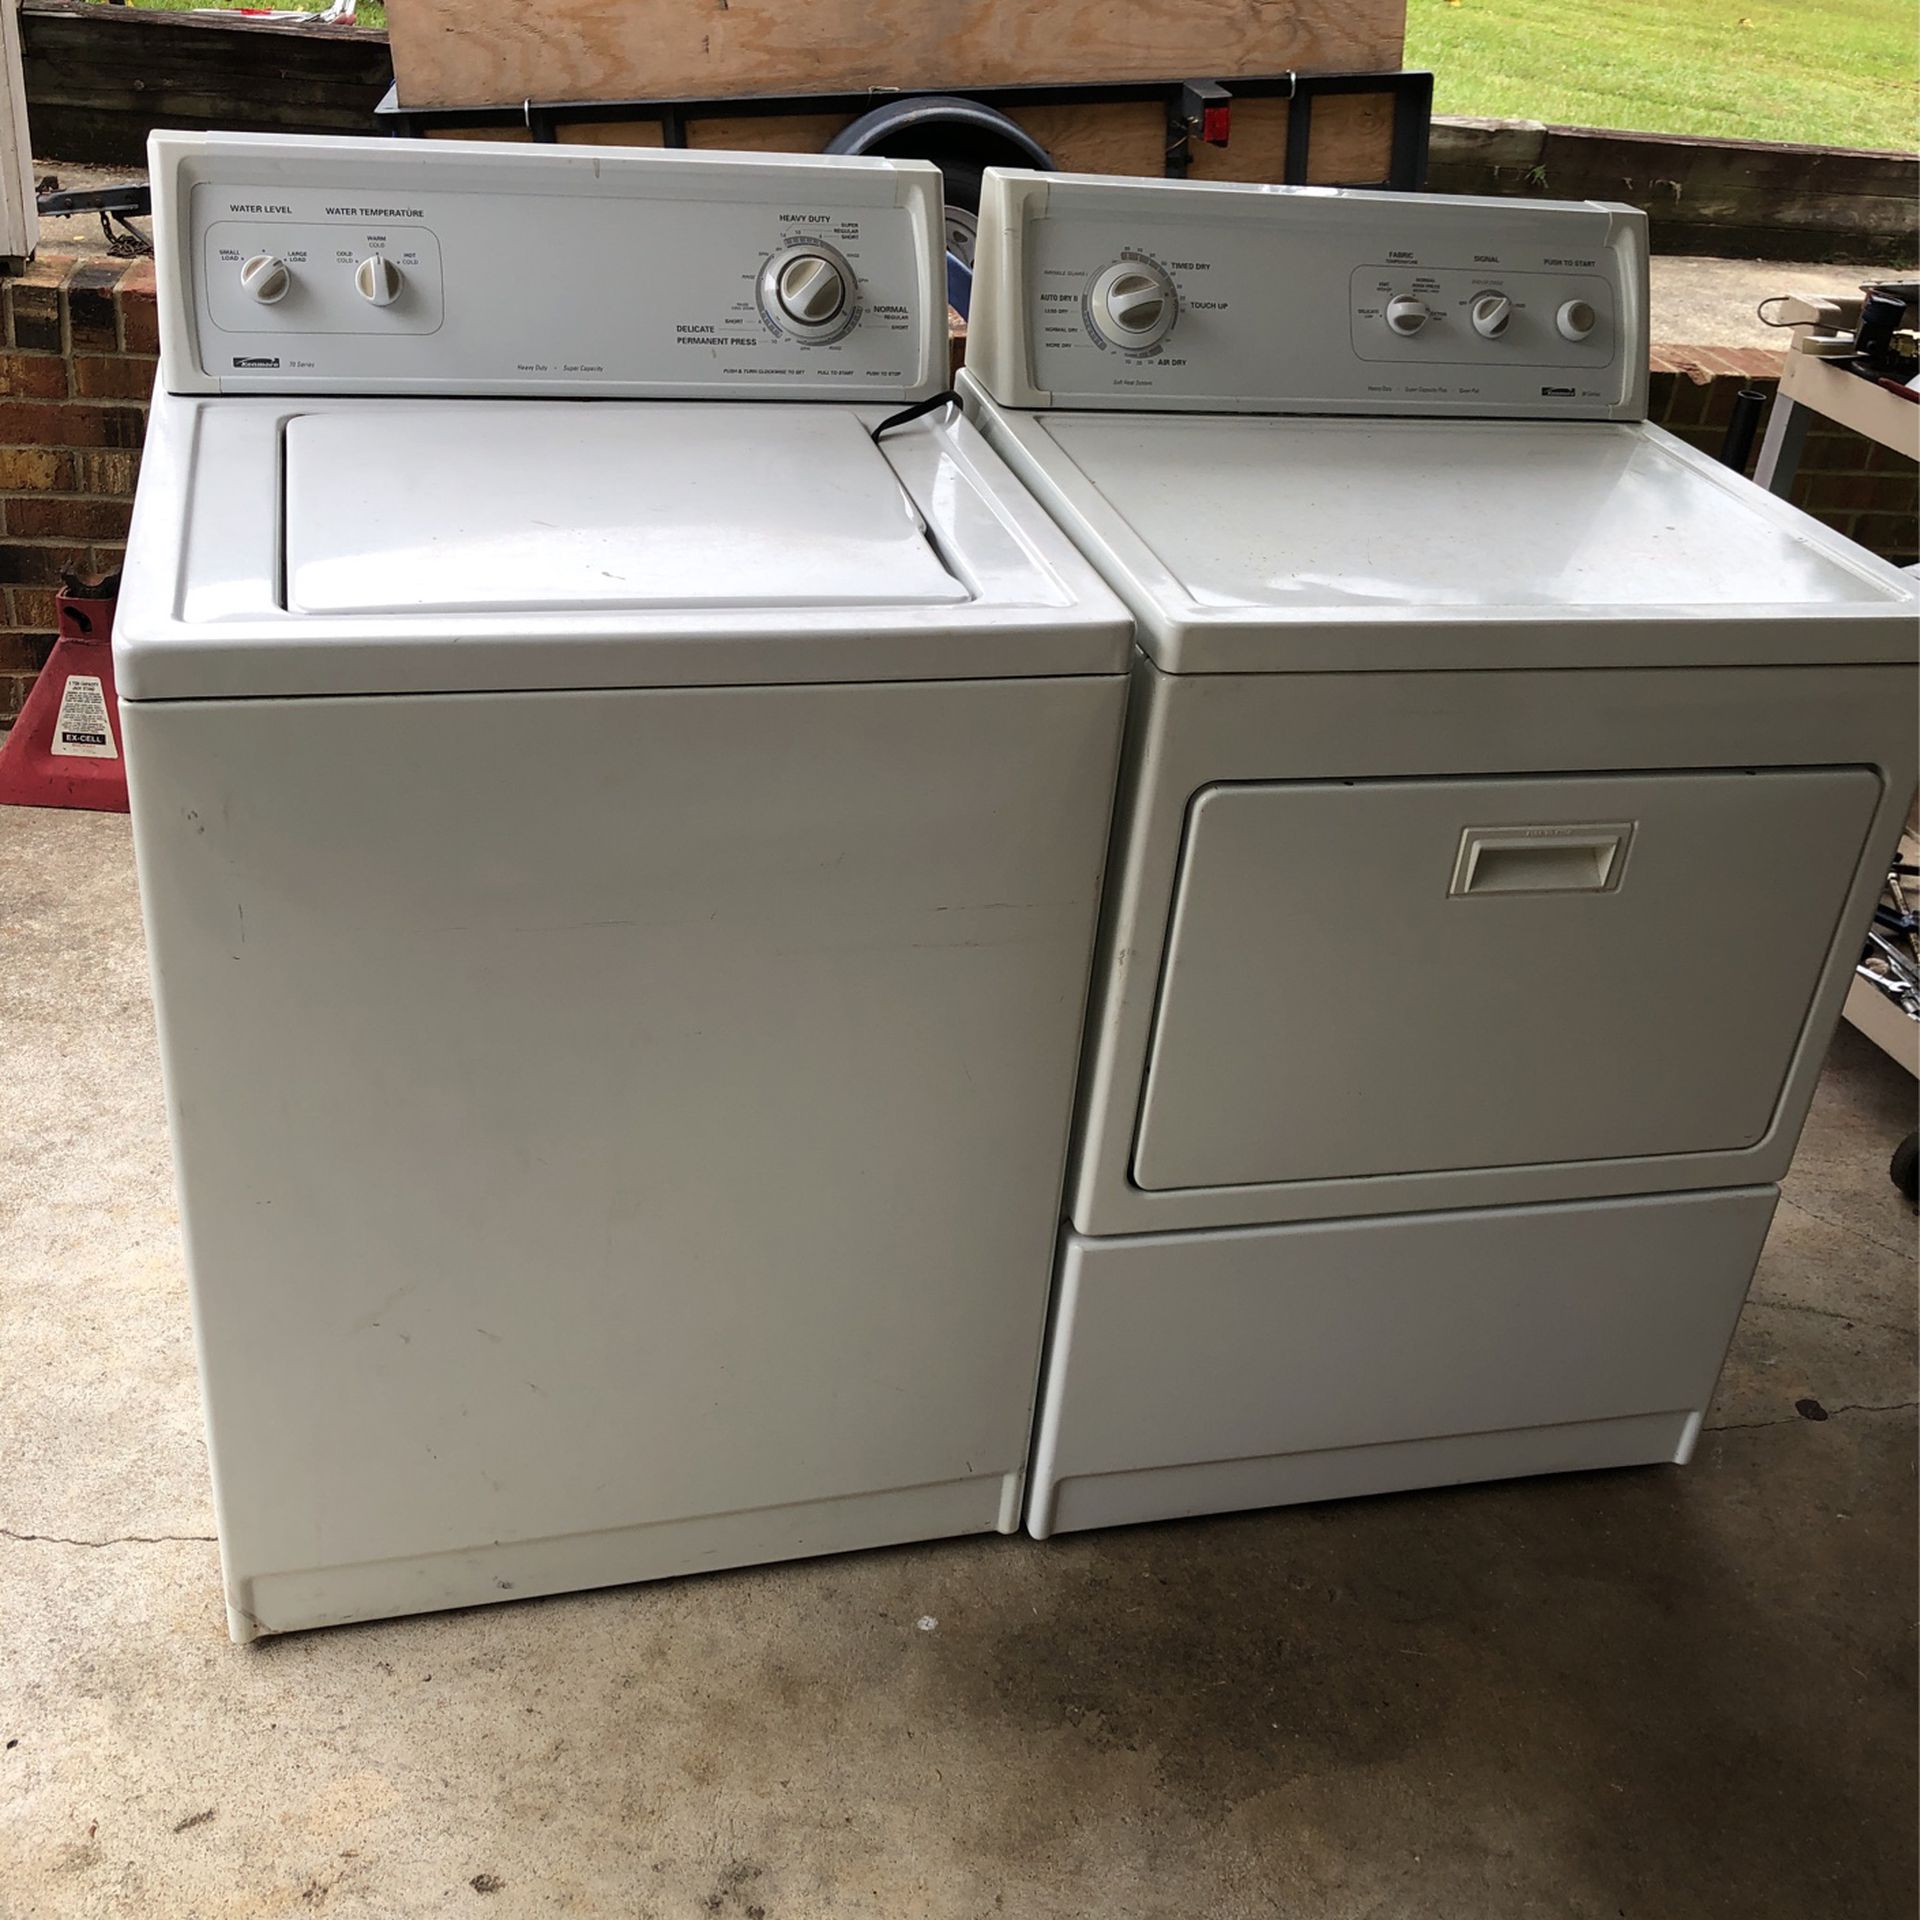 Kenmore Washer And Dryer Set 150.00